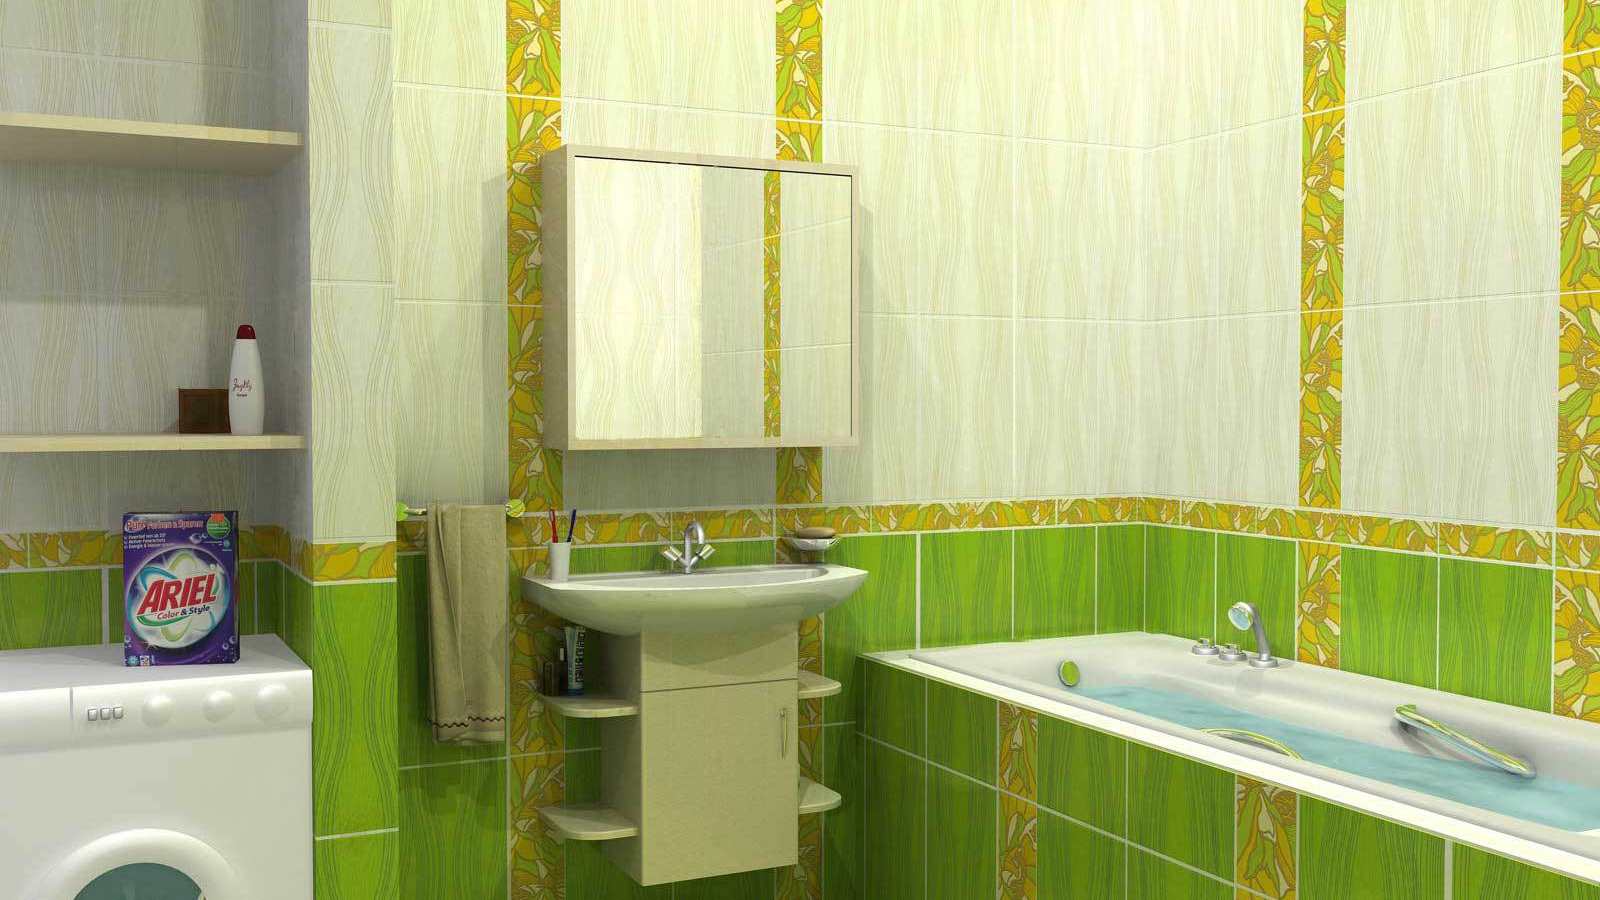 Green and white tiles in the bathroom